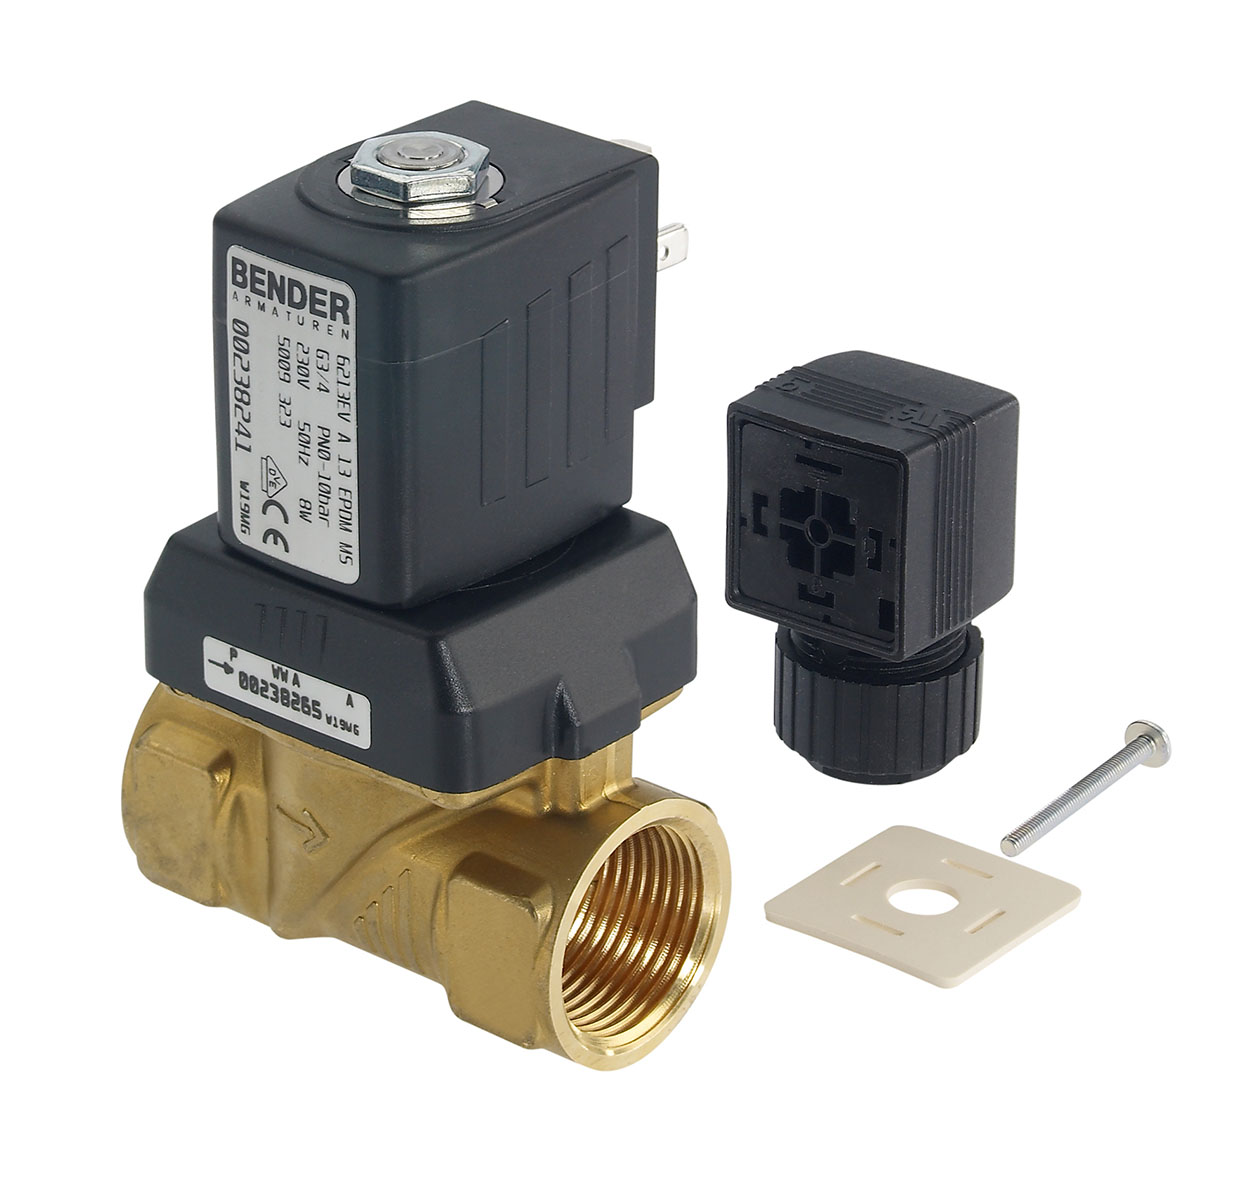 5009325 - 2/2 way solenoidvalve normally closed for fluids Type 1; female thread